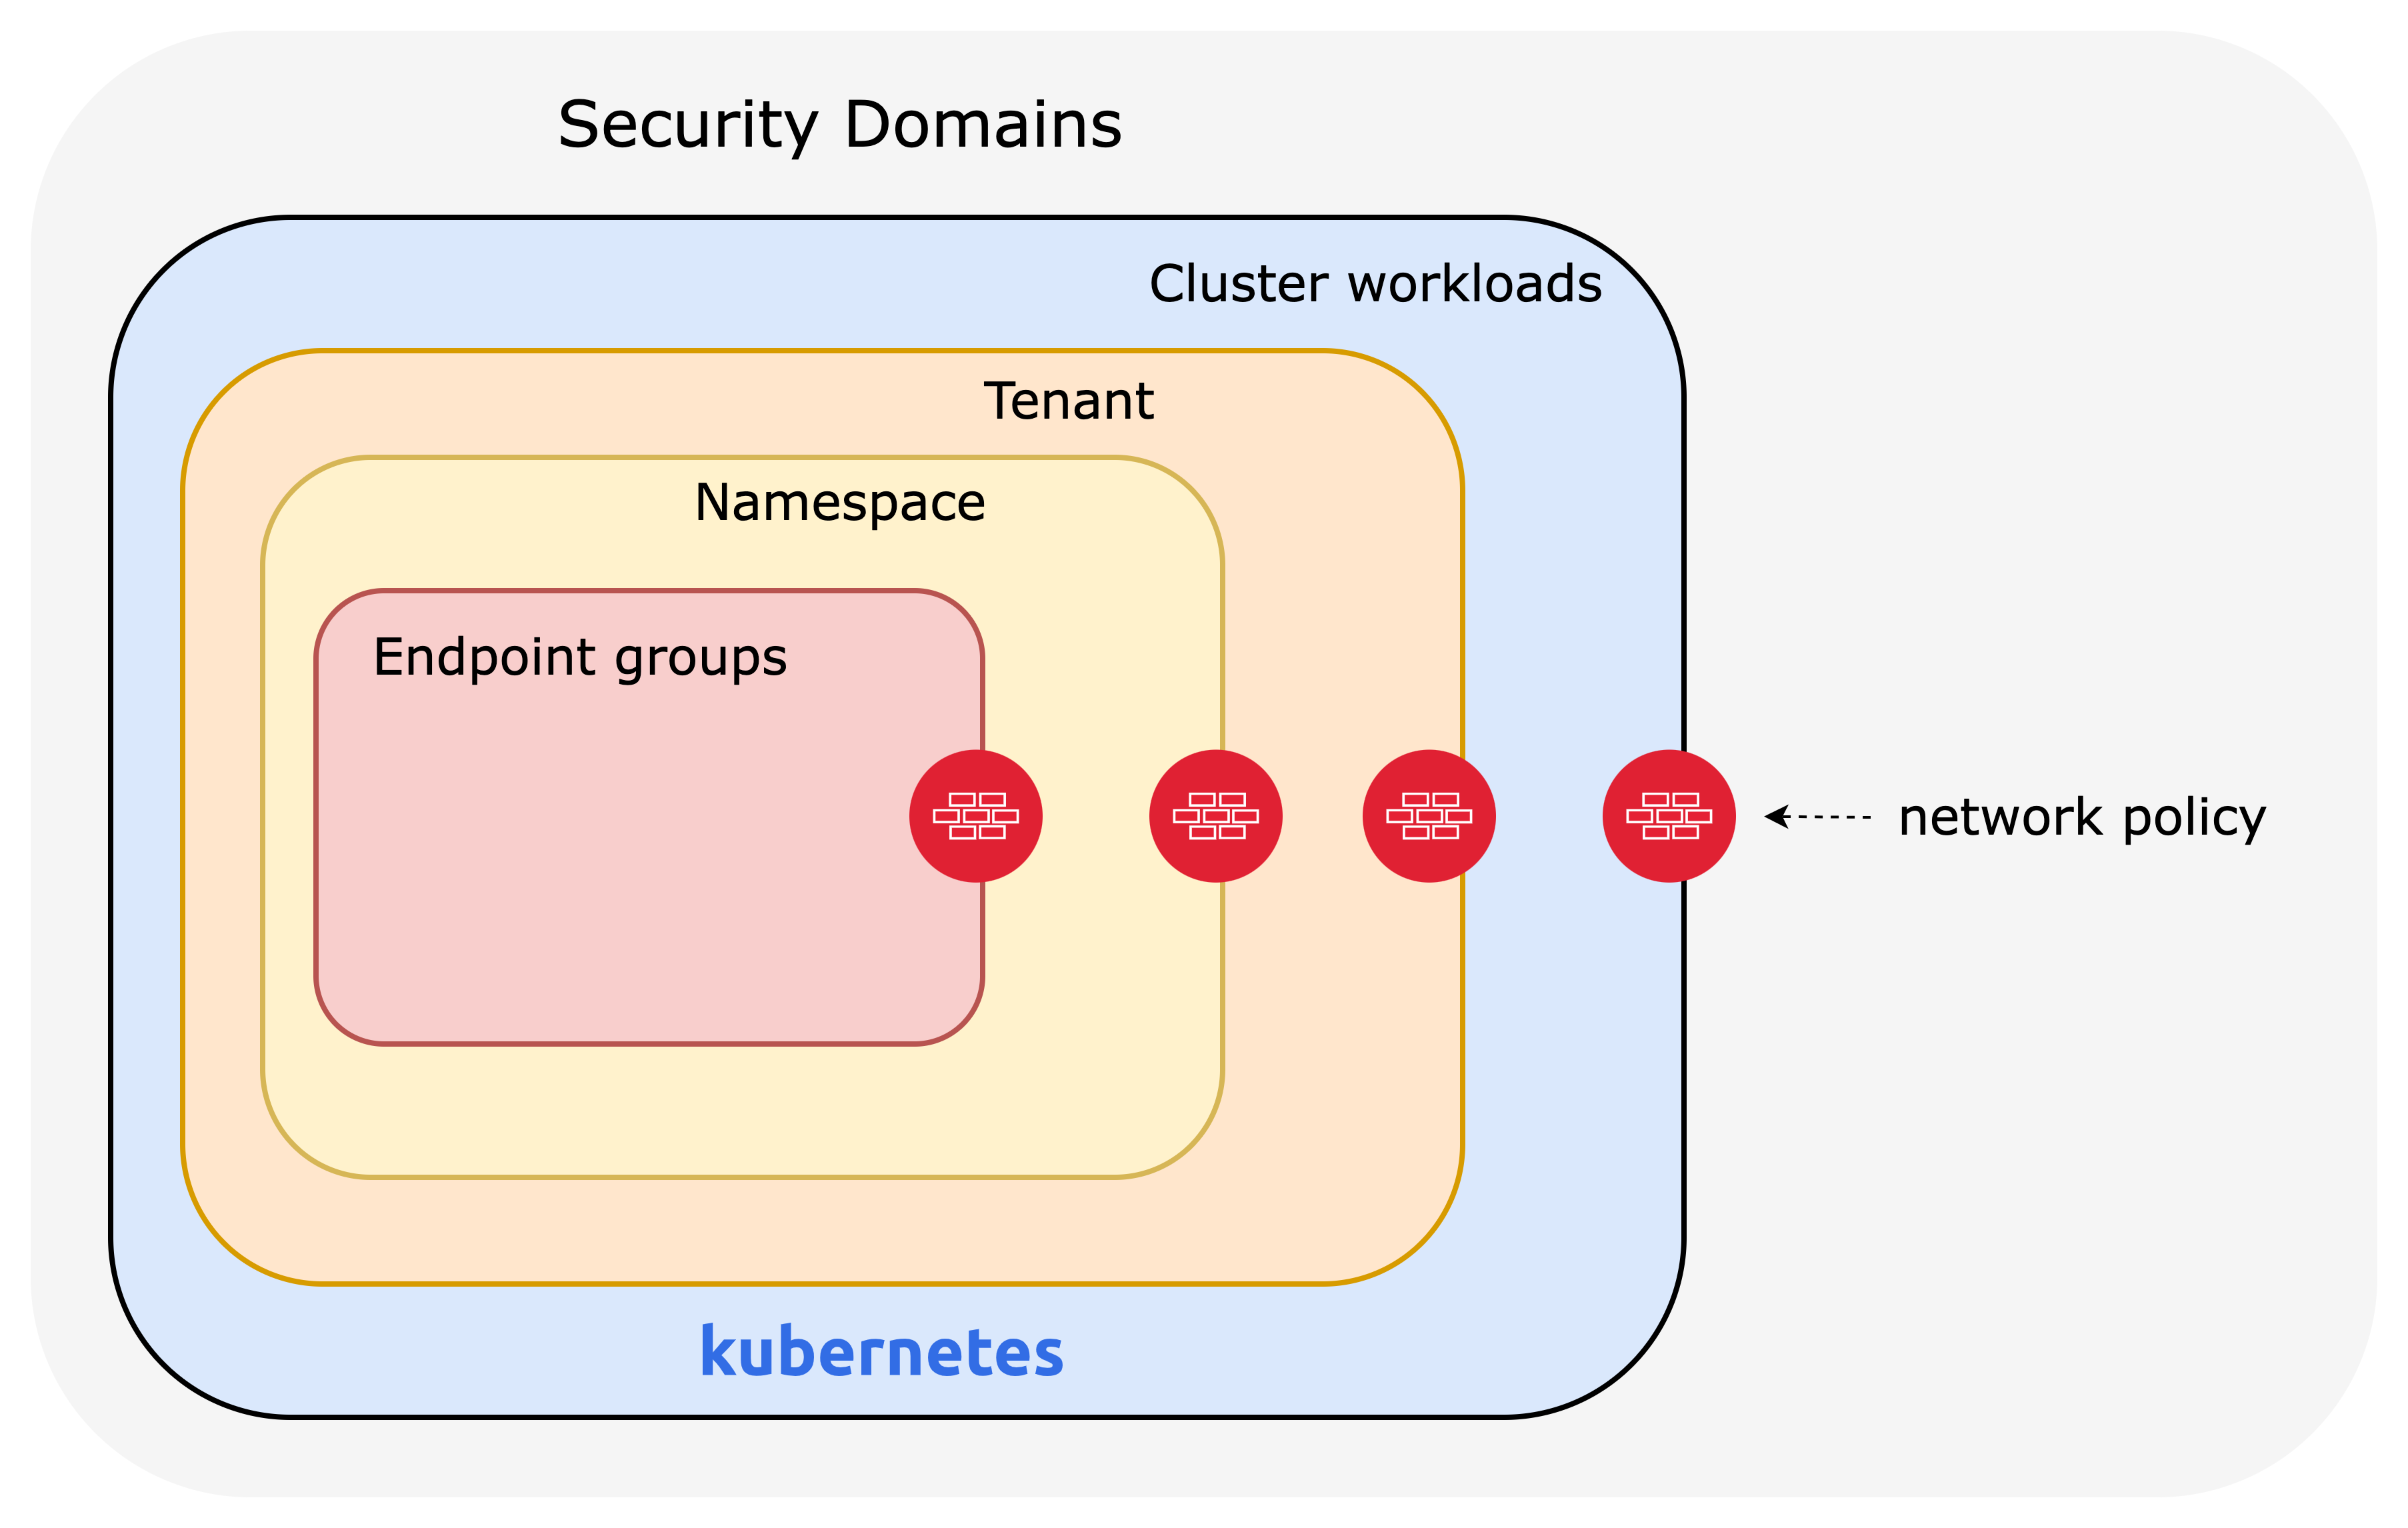 Security domains